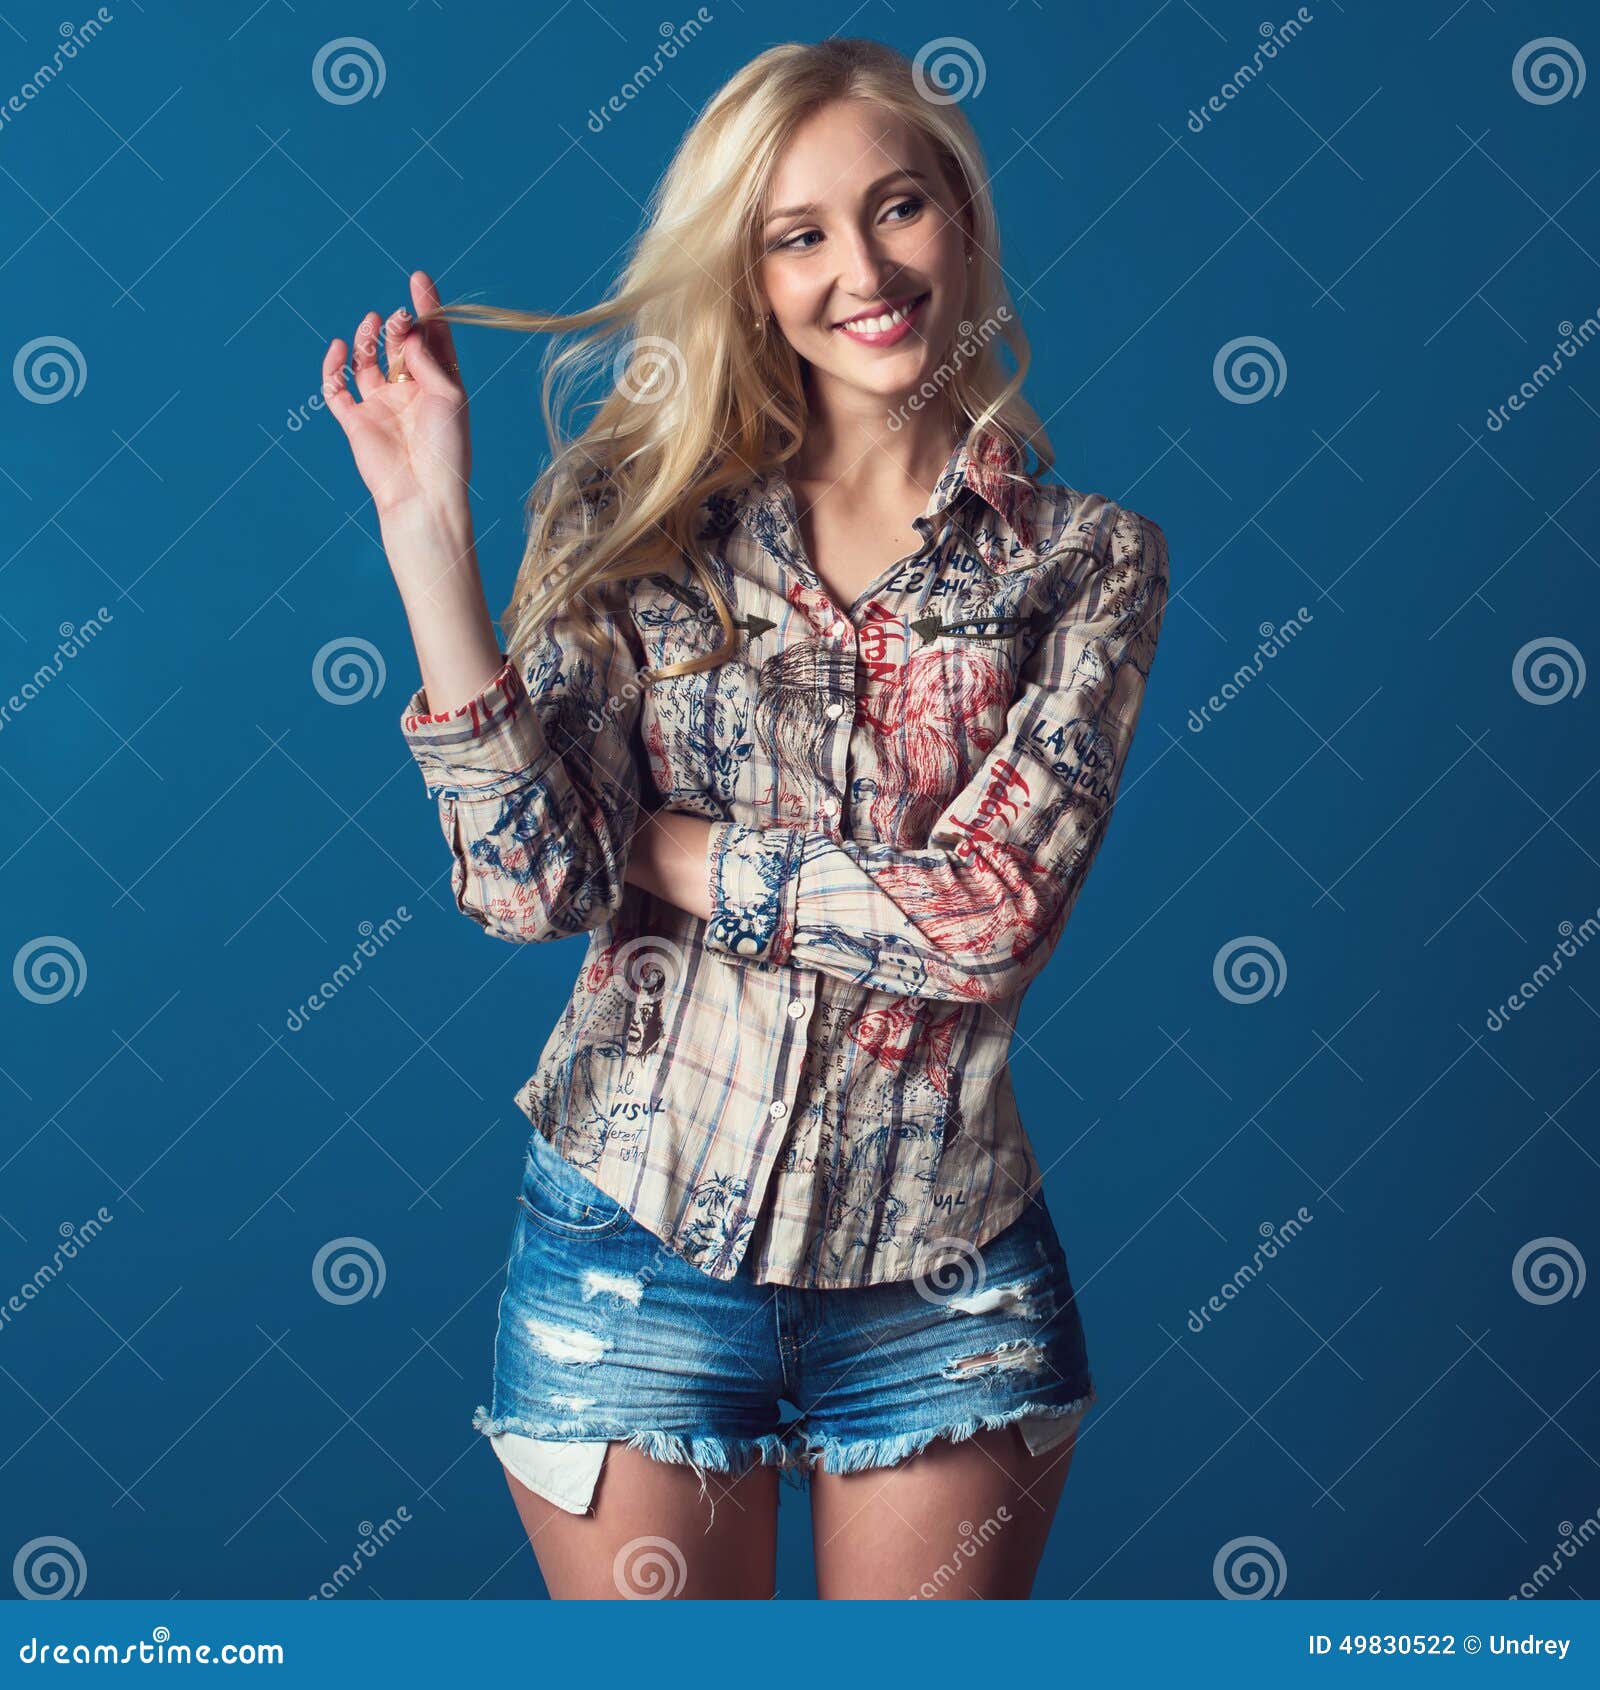 Tall Pretty Blond Girl with Adorable Smile Stock Photo - Image of ...